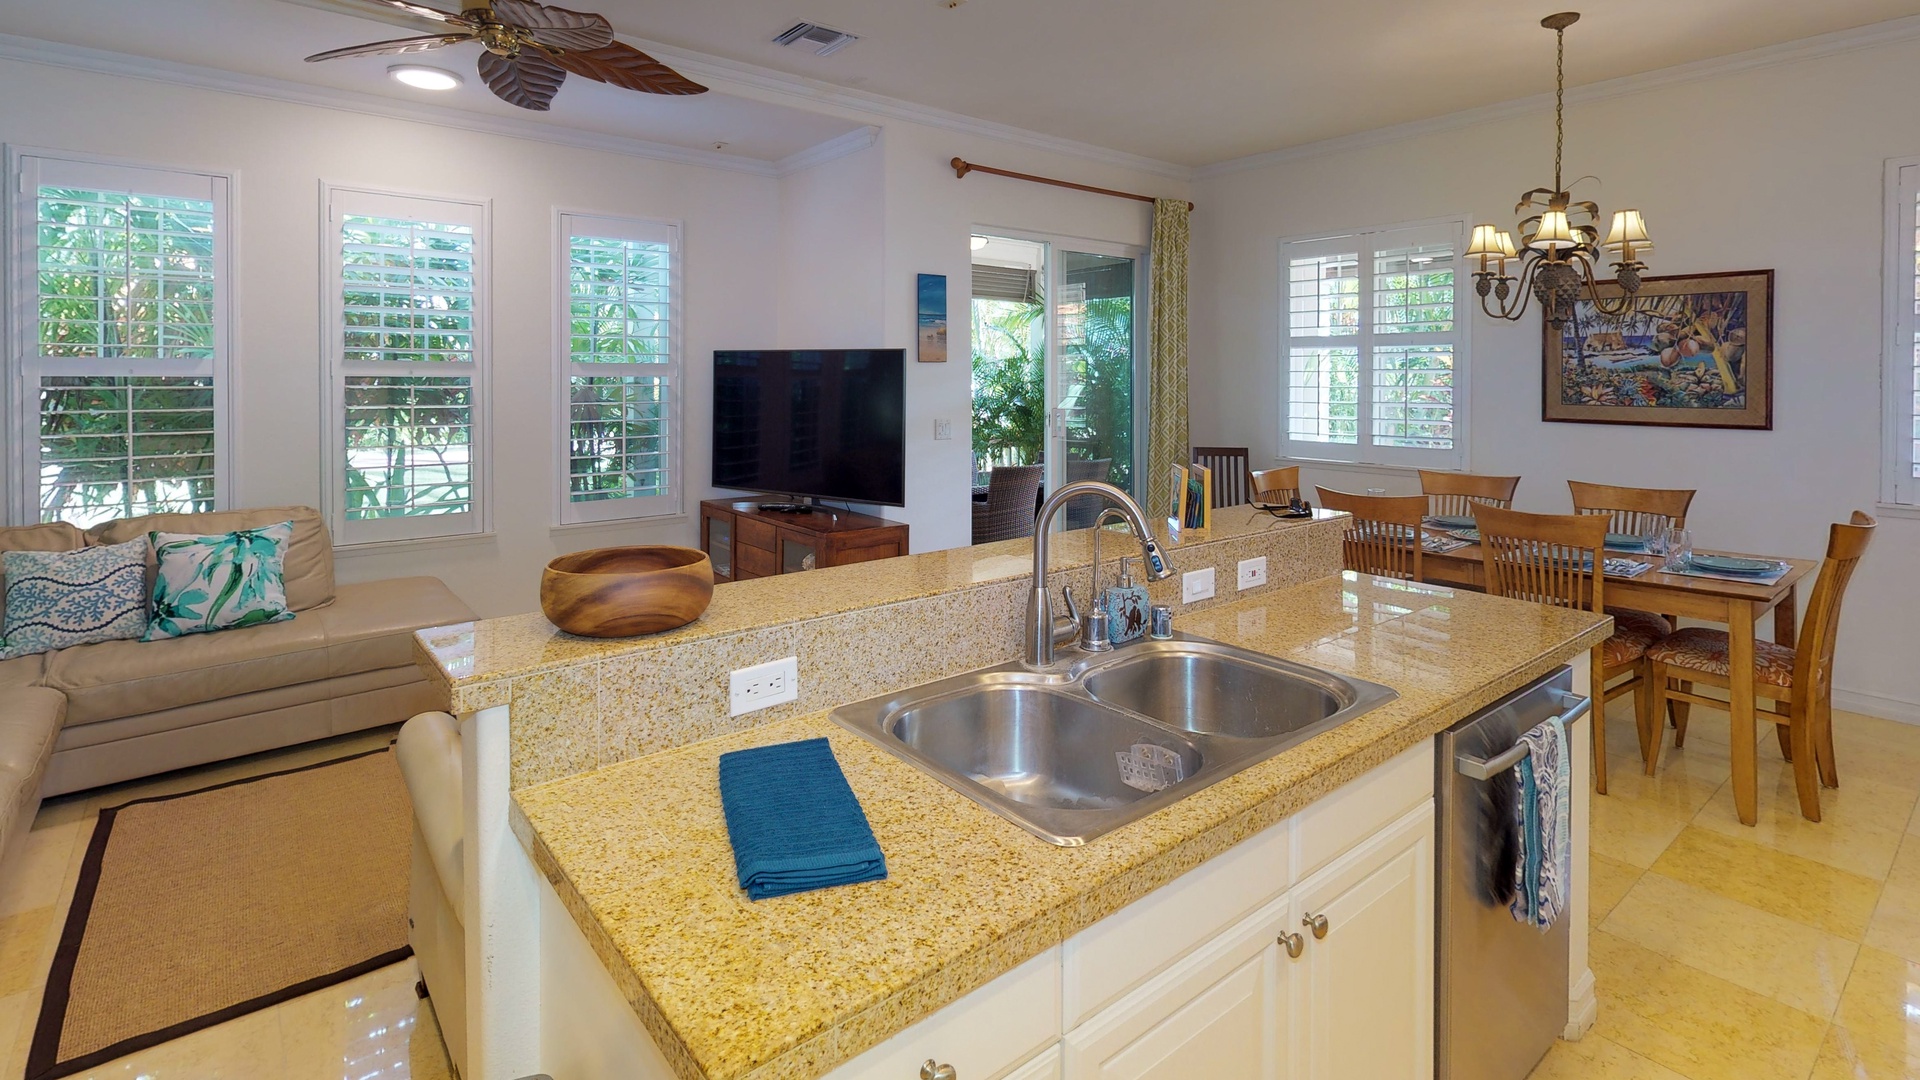 Kapolei Vacation Rentals, Coconut Plantation 1200-4 - Meal prep is a breeze and you can visit with all your family.